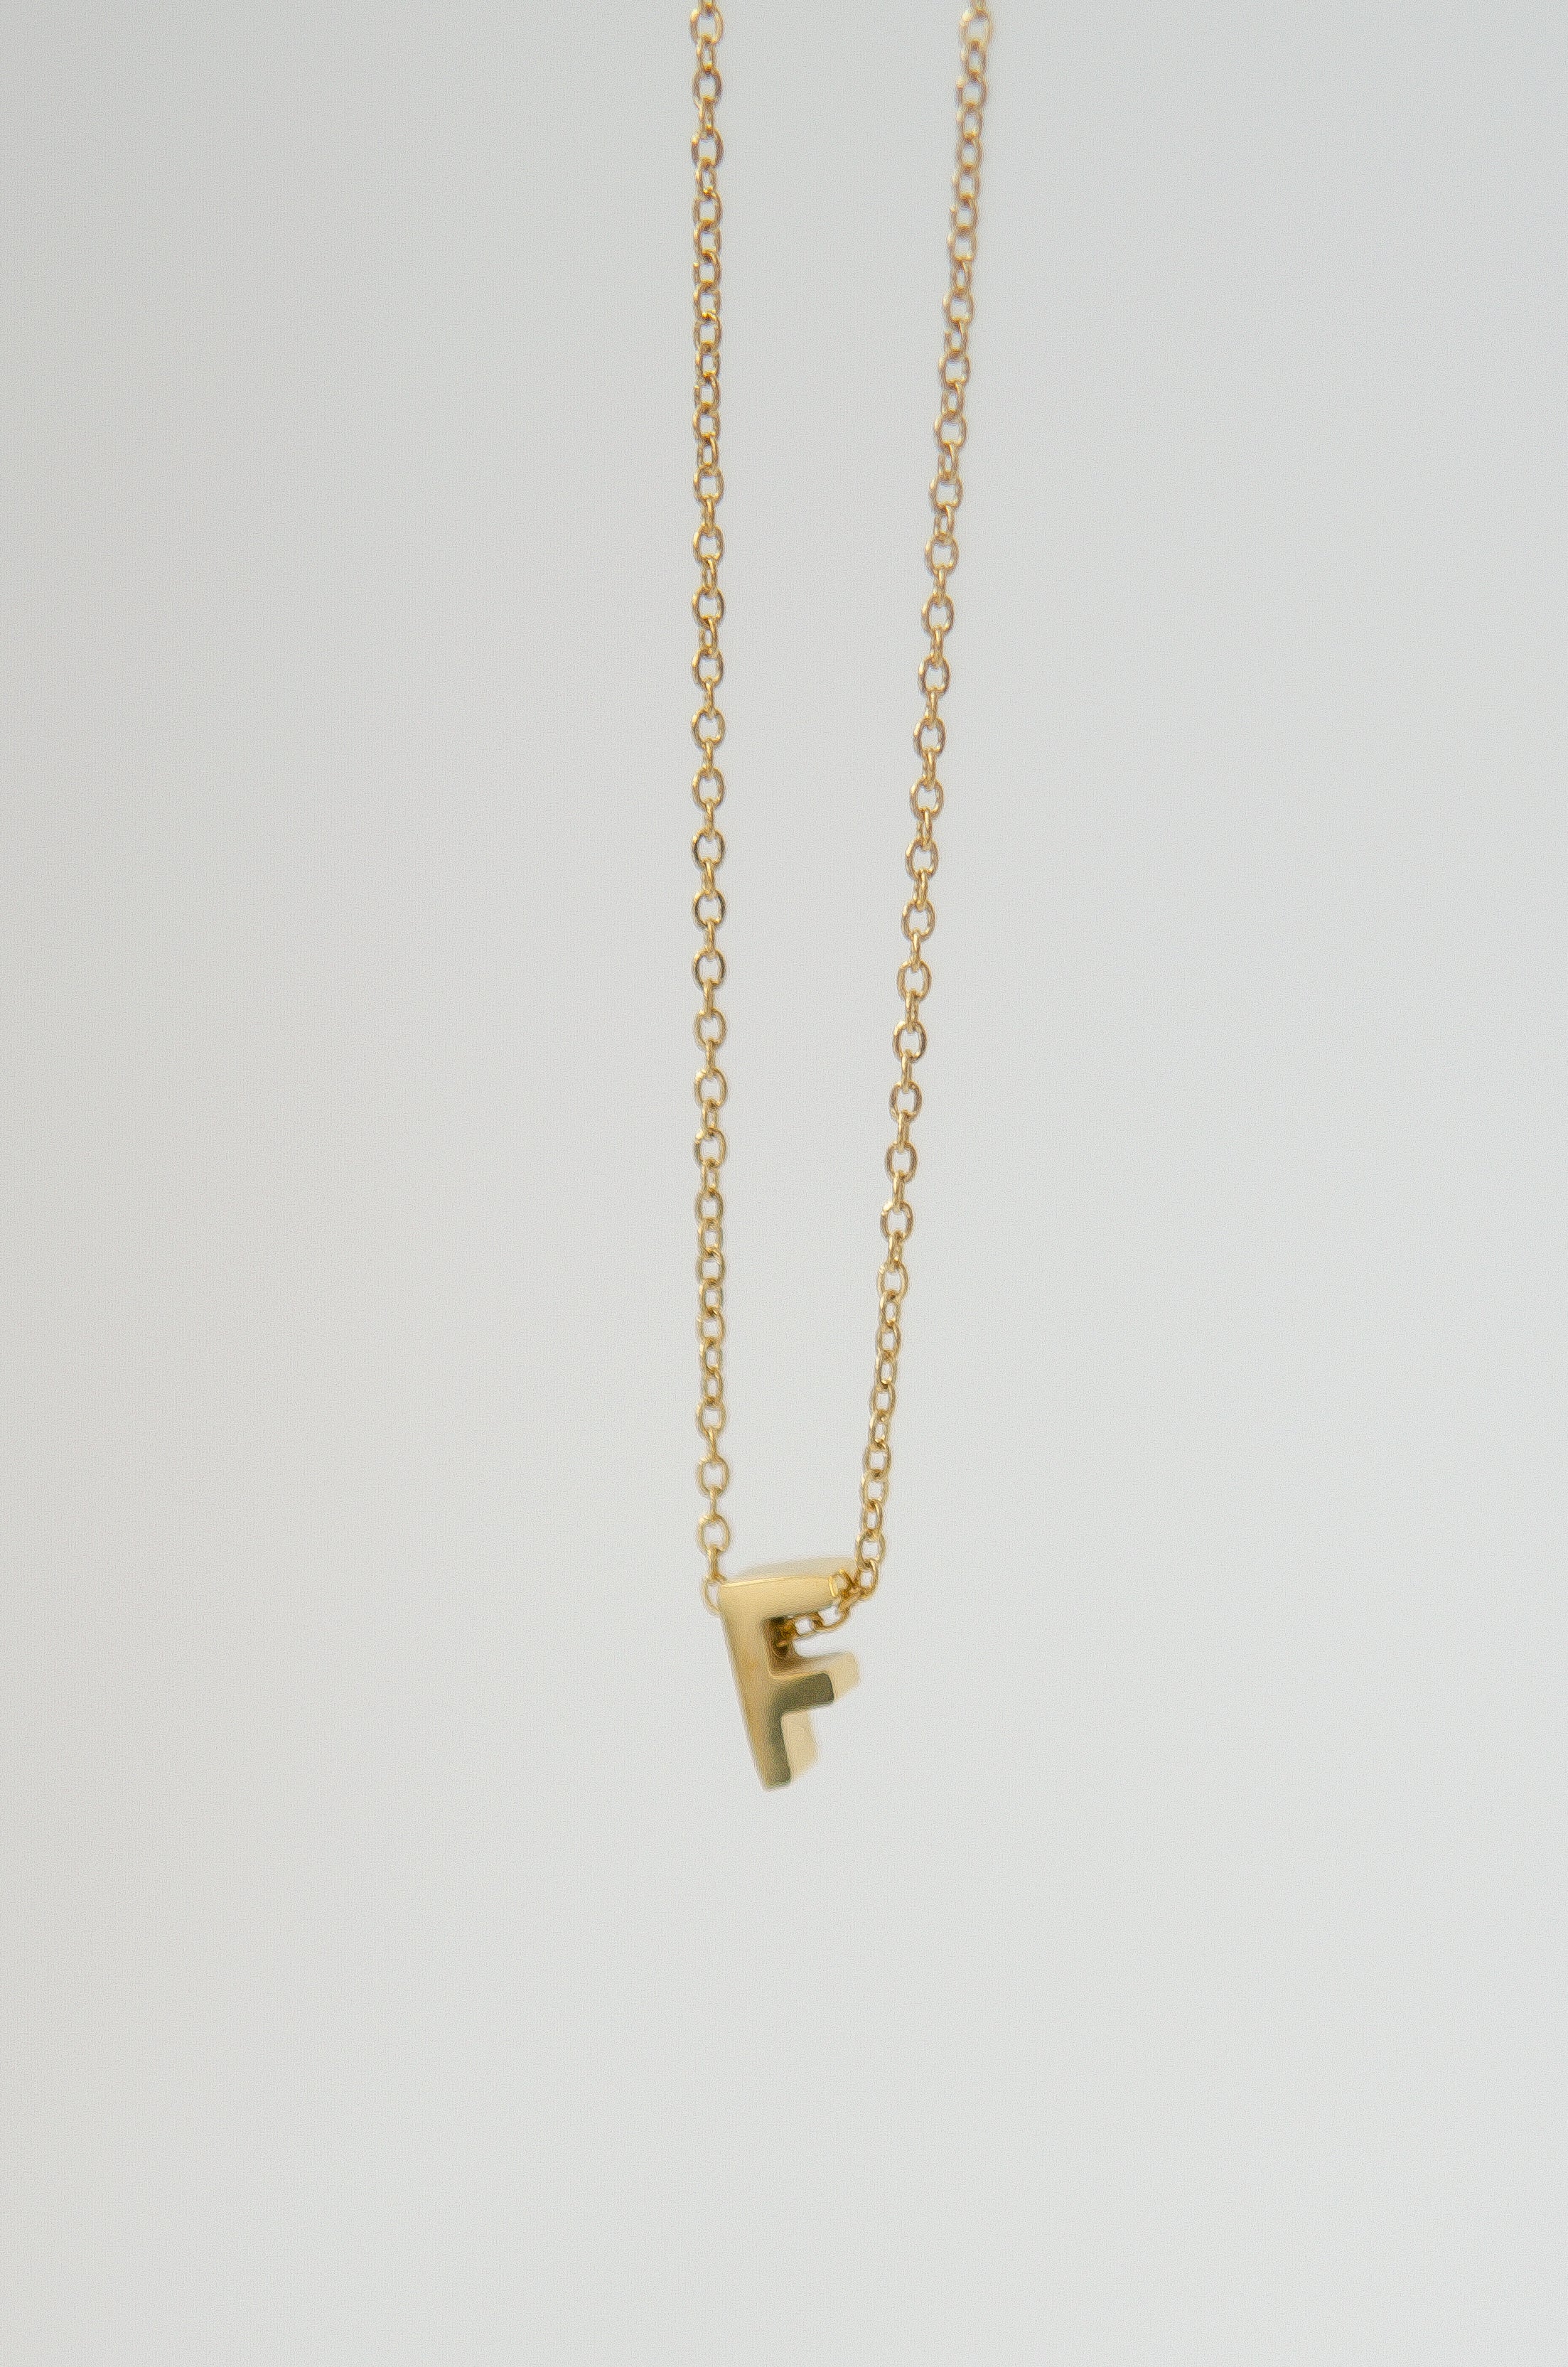 LETTERS NECKLACE // F